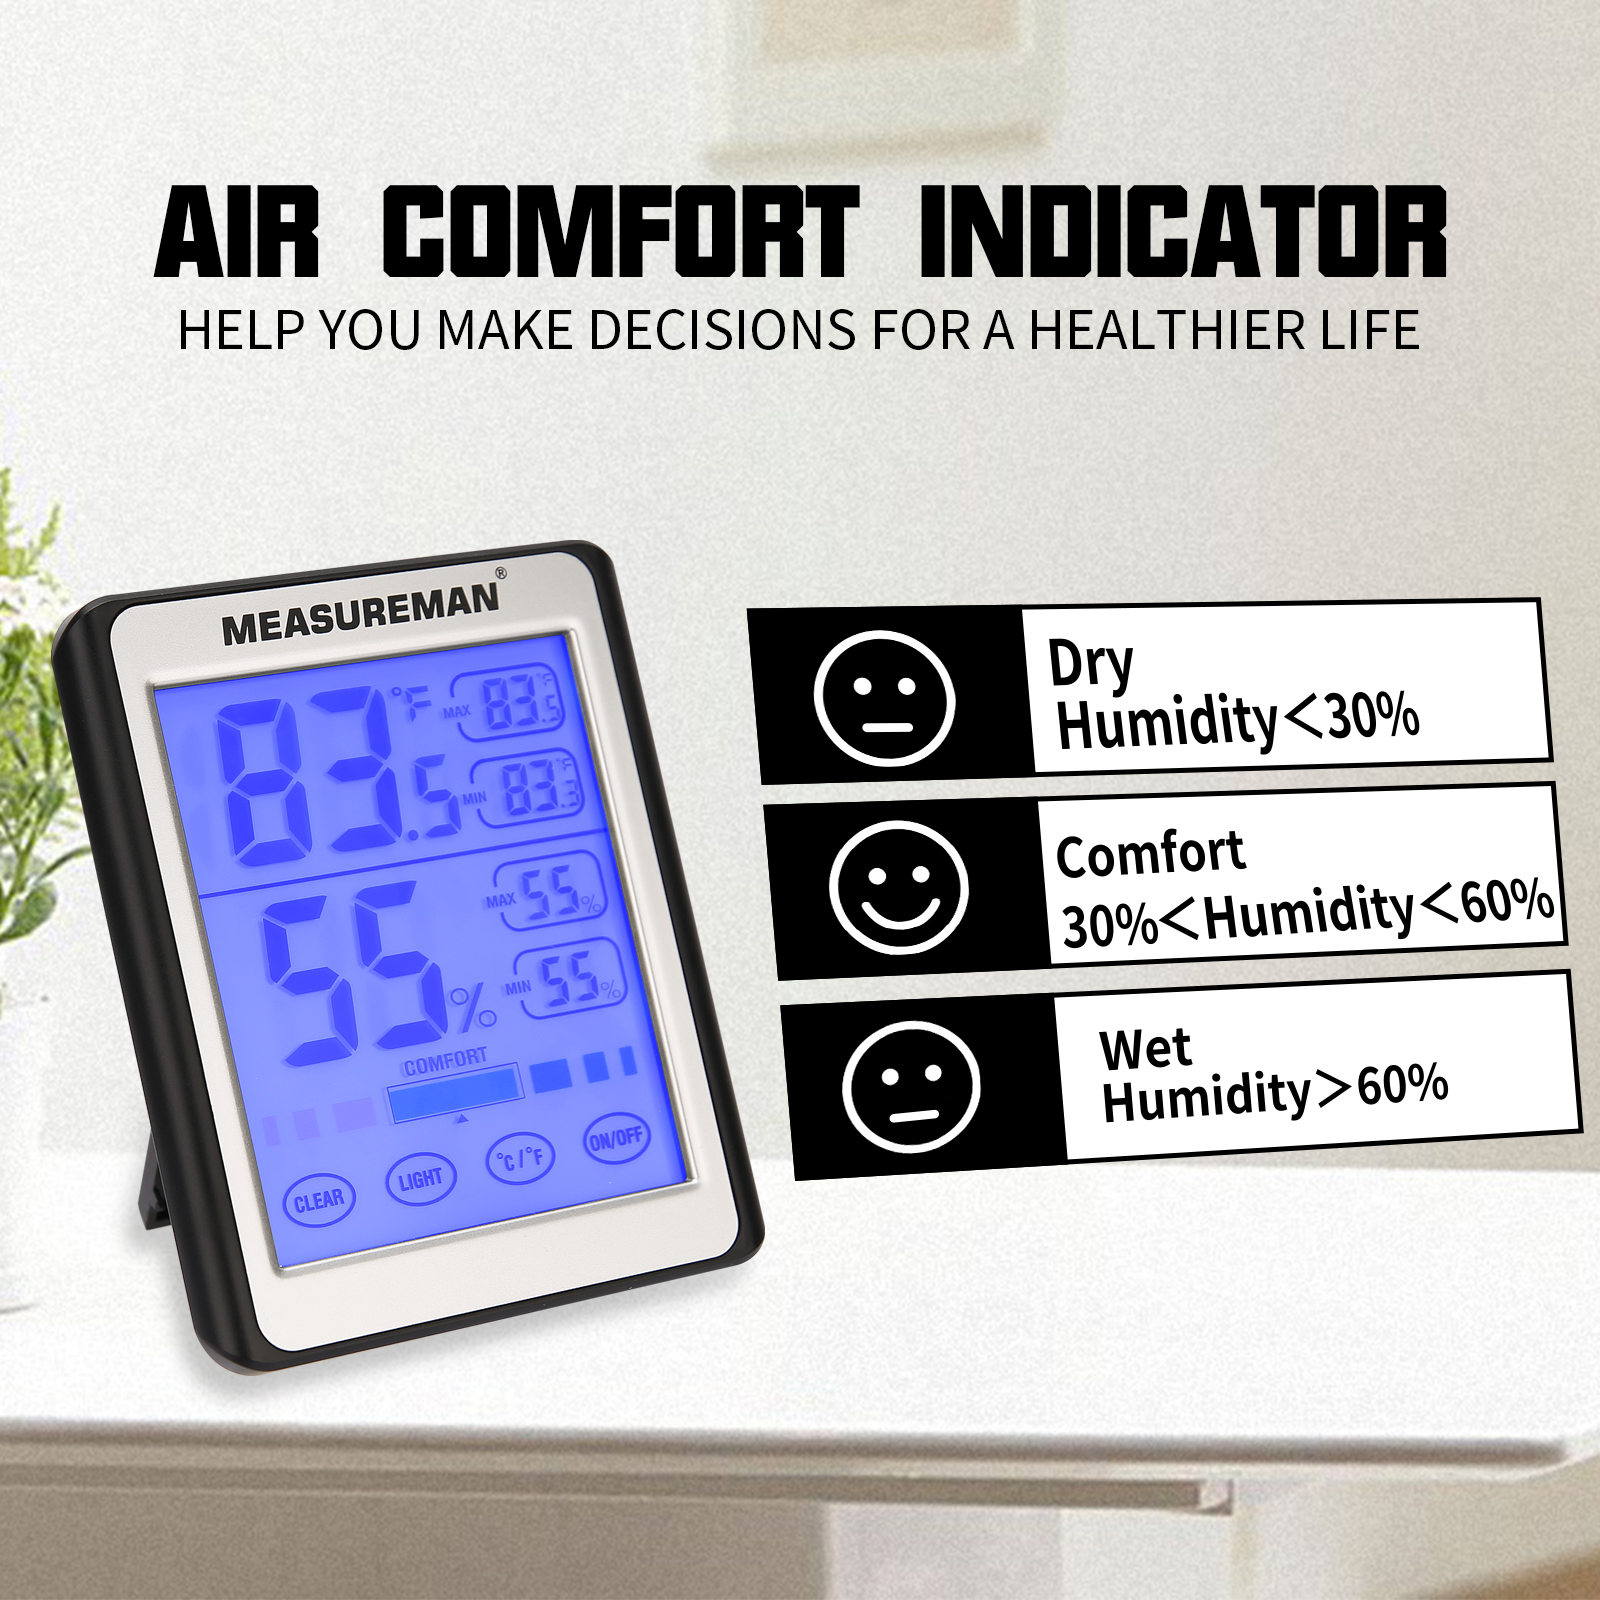 How Do You Measure Air Temperature Accurately?